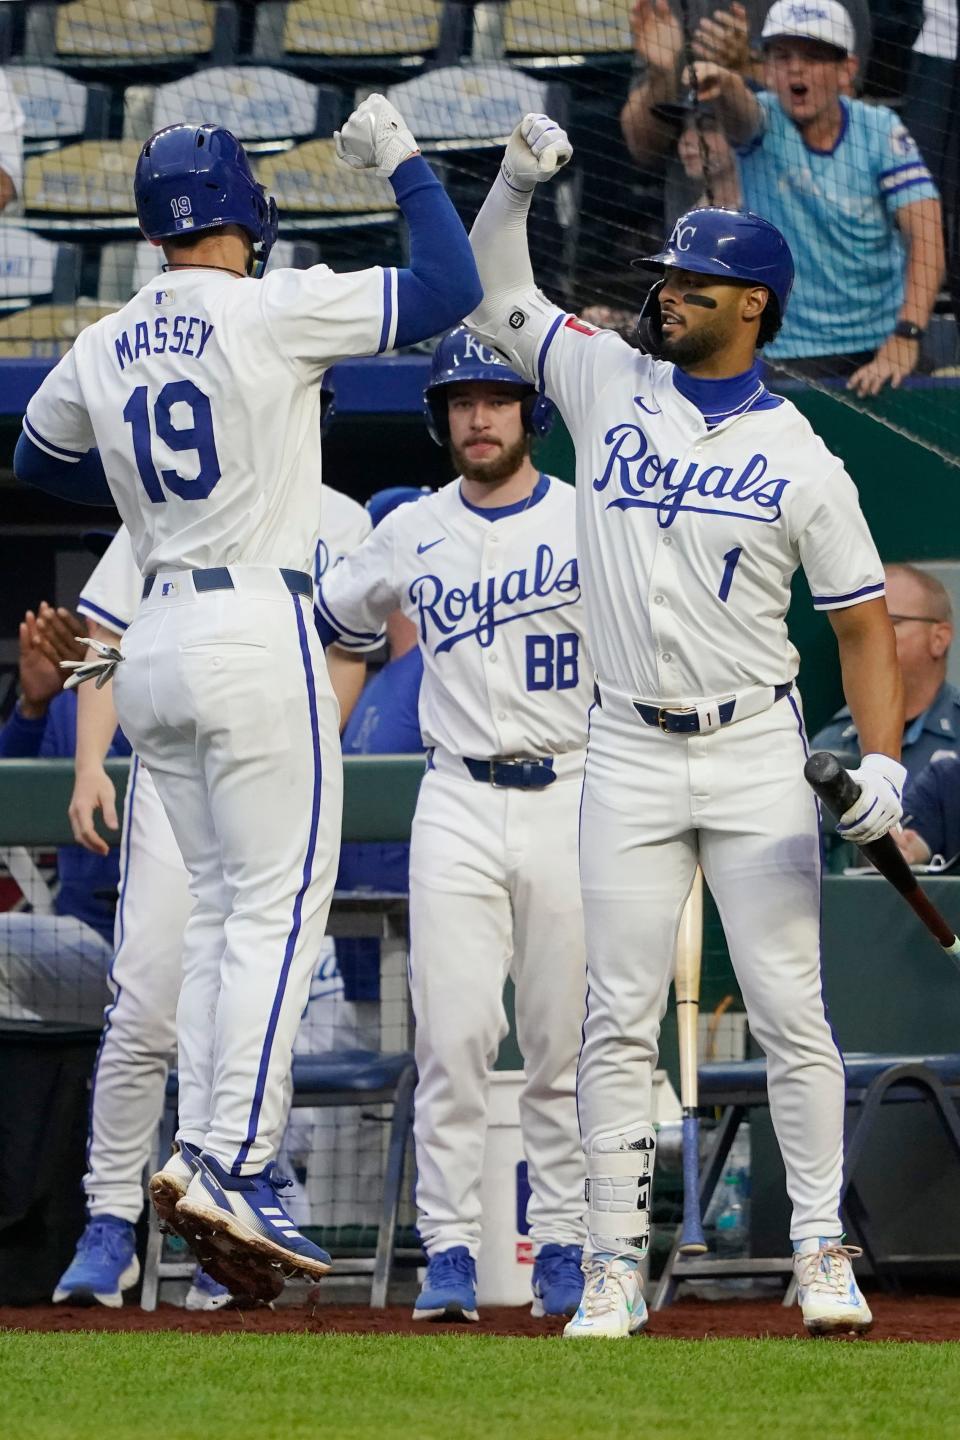 The Royals' Michael Massey (19) celebrates with MJ Melendez after hitting a home run in the seventh inning Monday night against the Brewers.